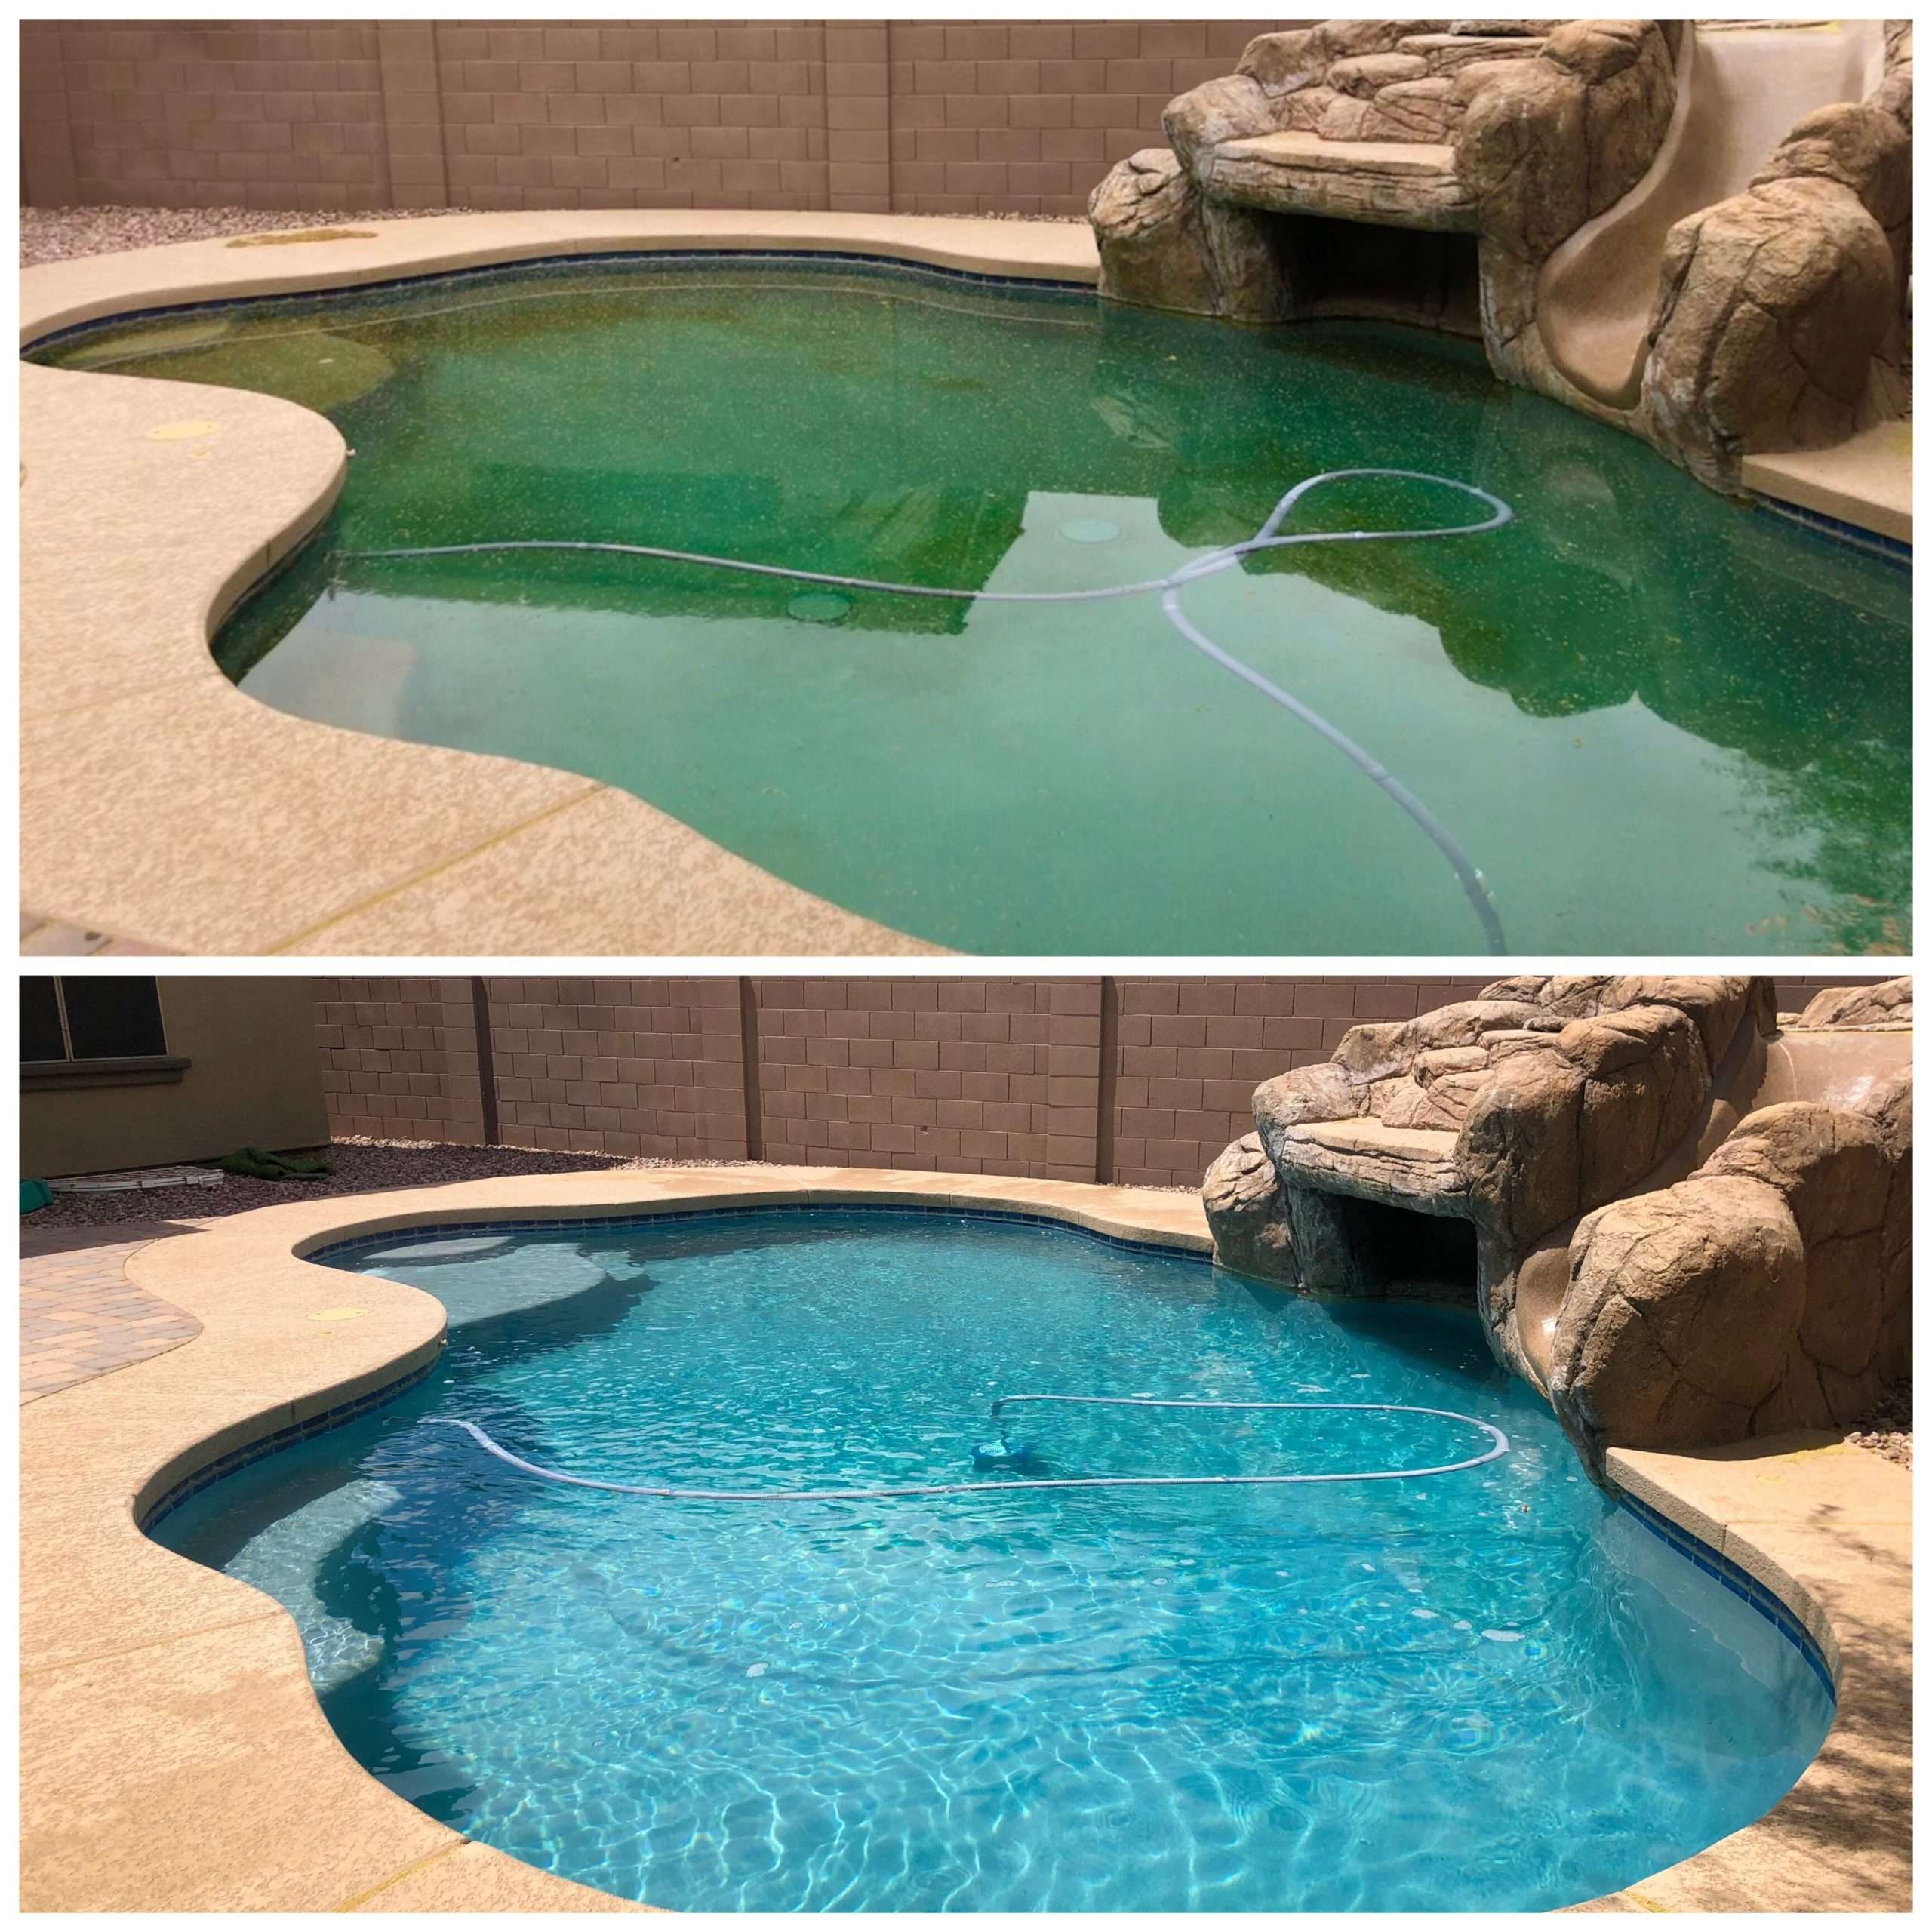 How To Clean Pool Tile Without Draining